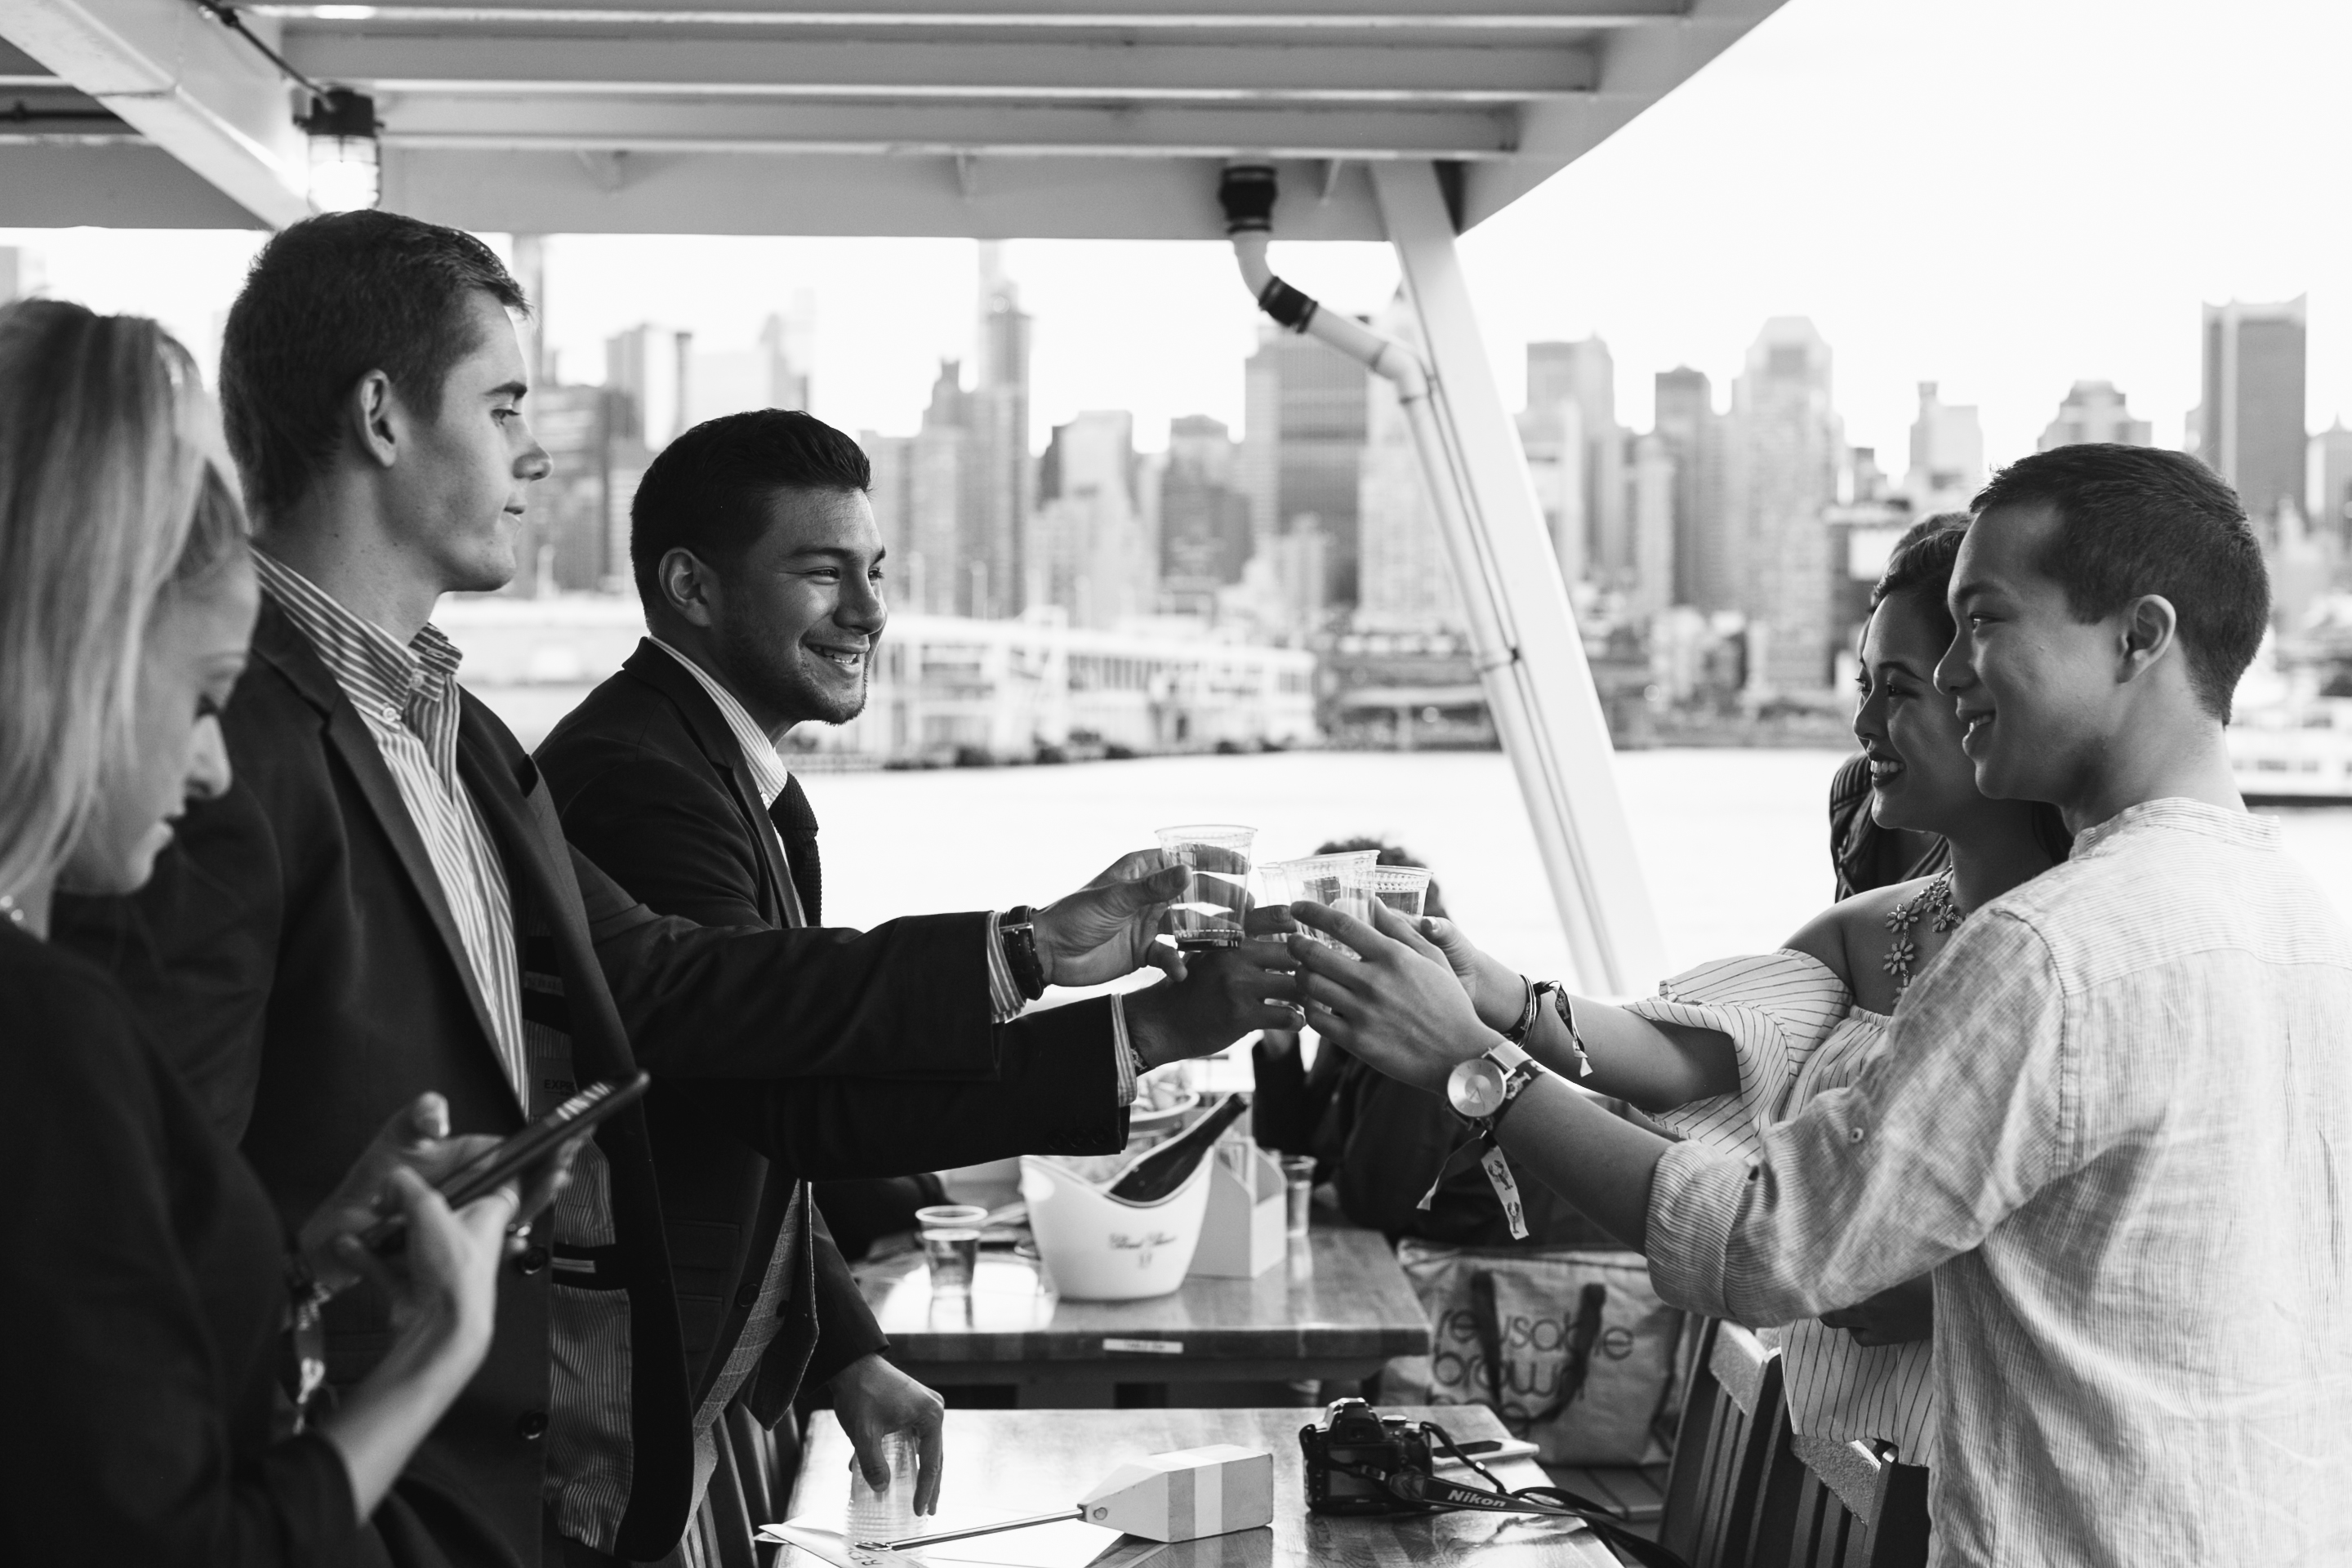 Alea Lovely boat ride on nrlobsterco - Party, hosting a party, HOSTING A FASHION EVENT FROM YOUR FRIENDS? HOW TO KEEP IT STYLISH - dandy in the bronx